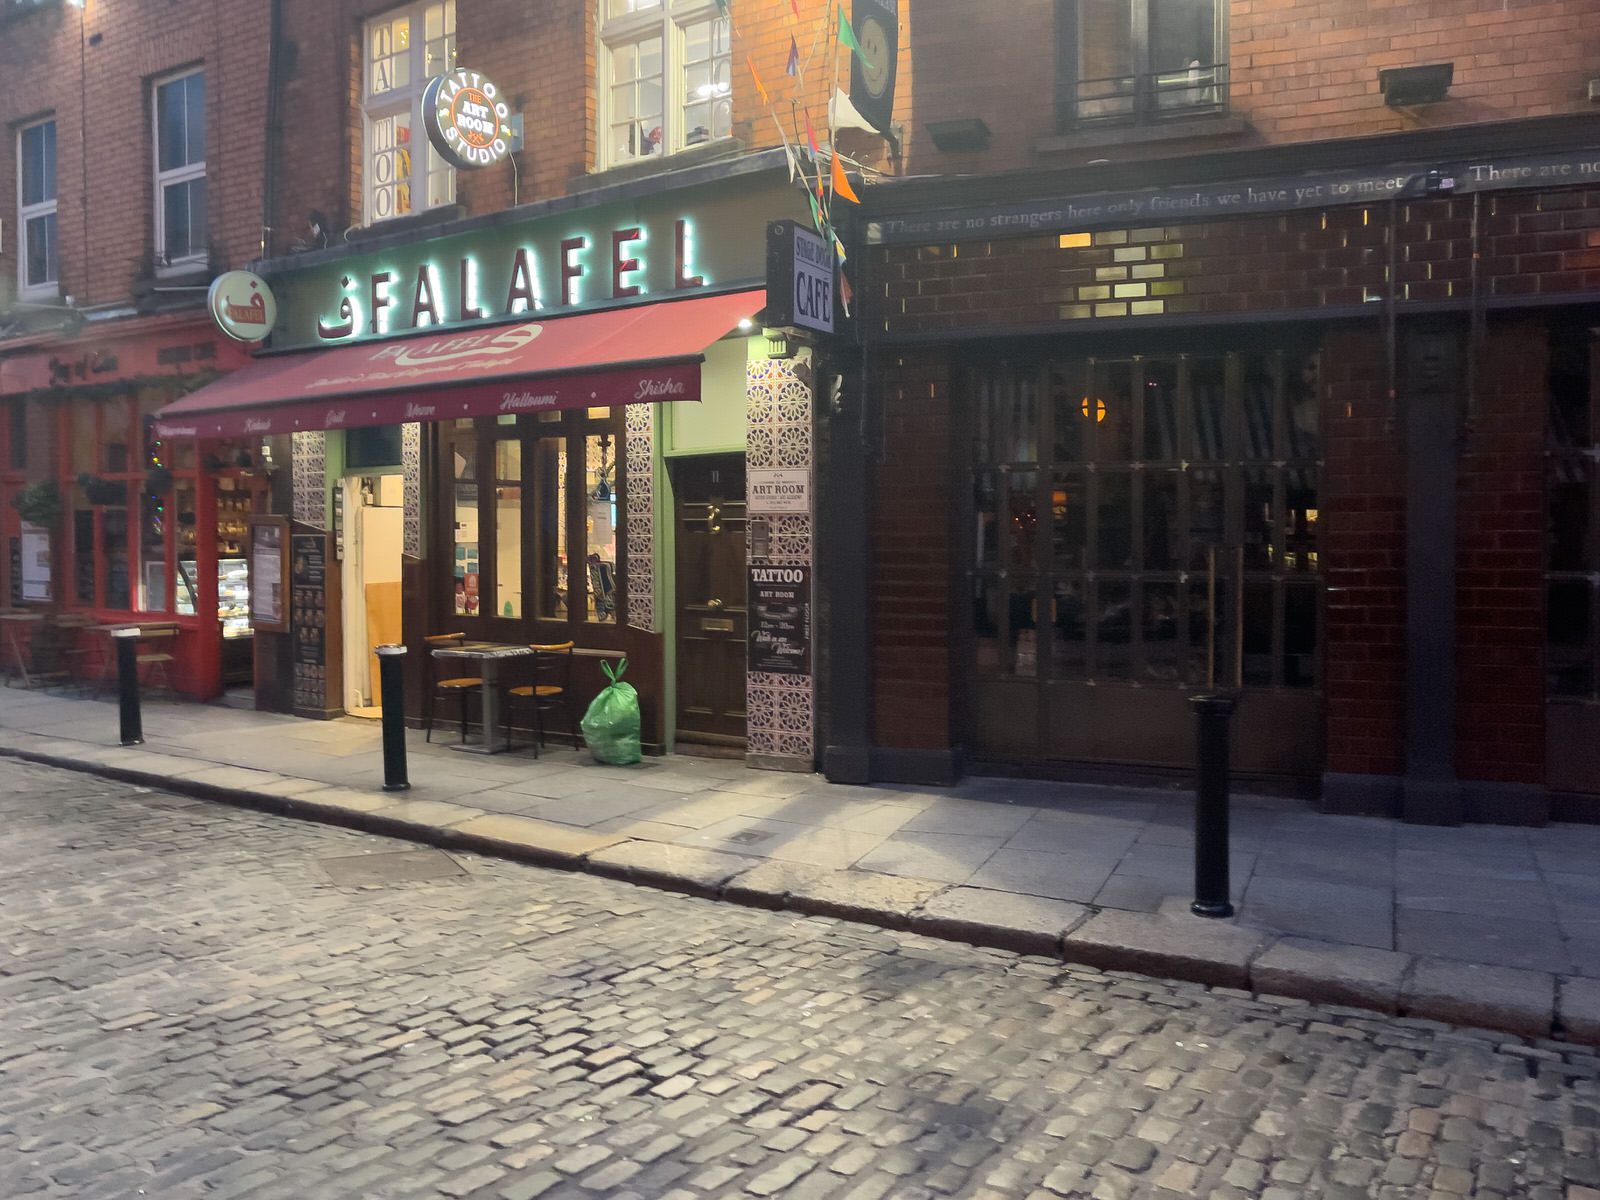 I VISITED TEMPLE BAR TODAY [AS NIGHTFALL WAS APPROACHING]-225369-1